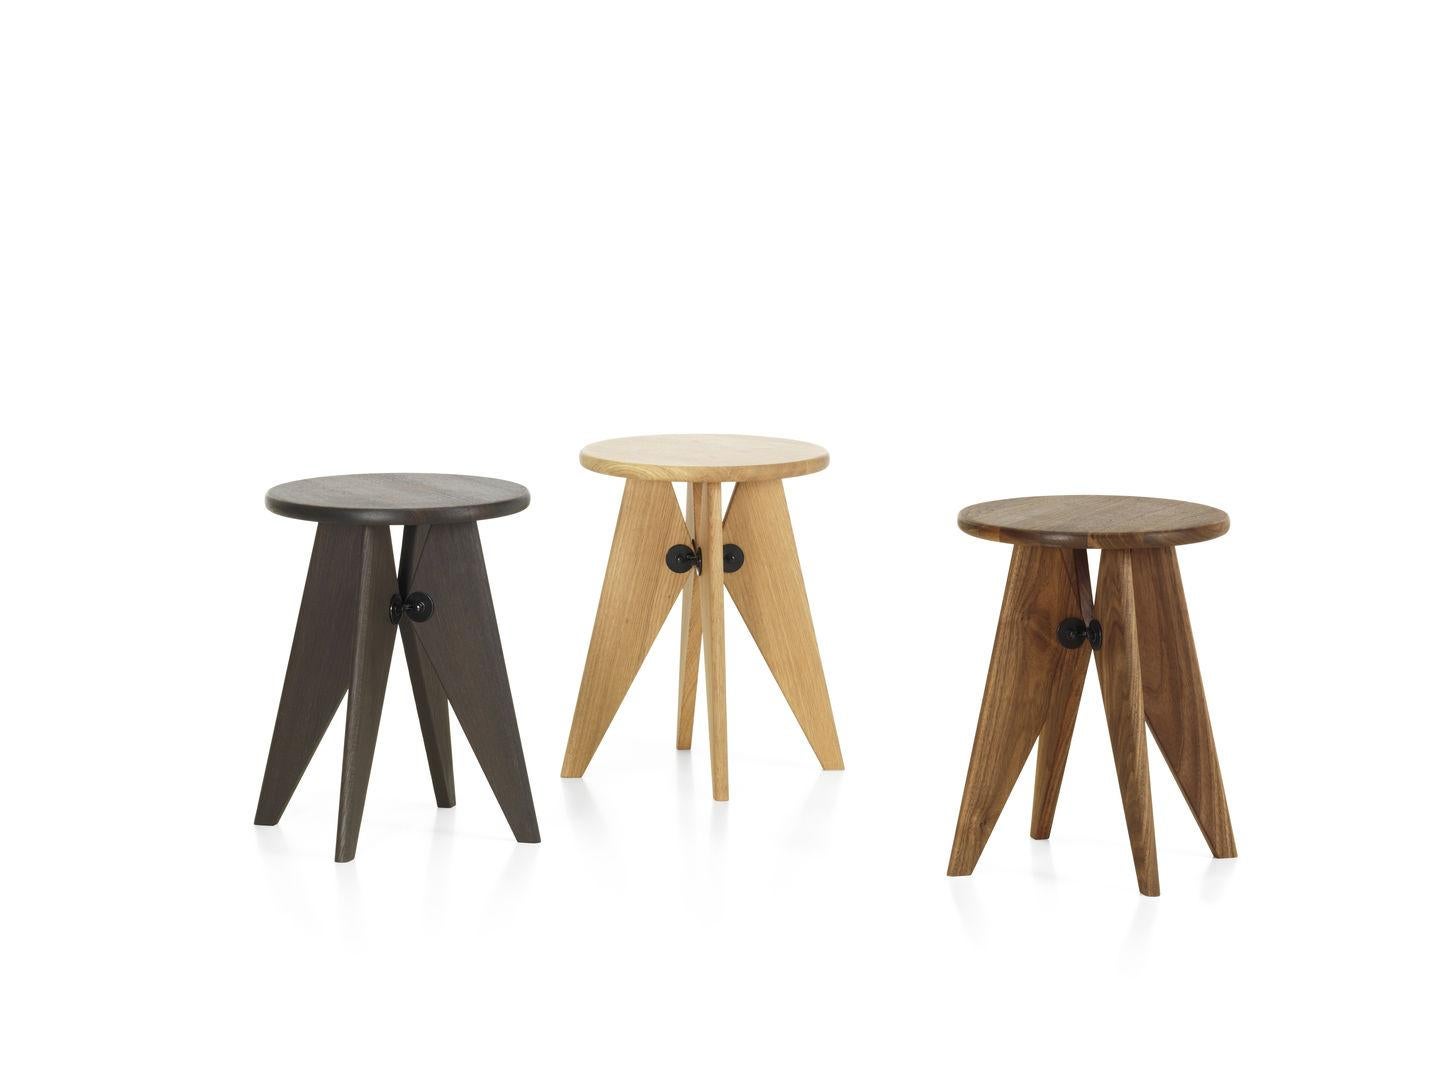 Vitra Tabouret Solvay stool in smoked oak by Jean Prouvé. Tabouret Solvay bears the unmistakable signature of Jean Prouvé, reflecting an aesthetic based on structural requirements. Tabouret Solvay is a simple, robust stool made of solid wood that